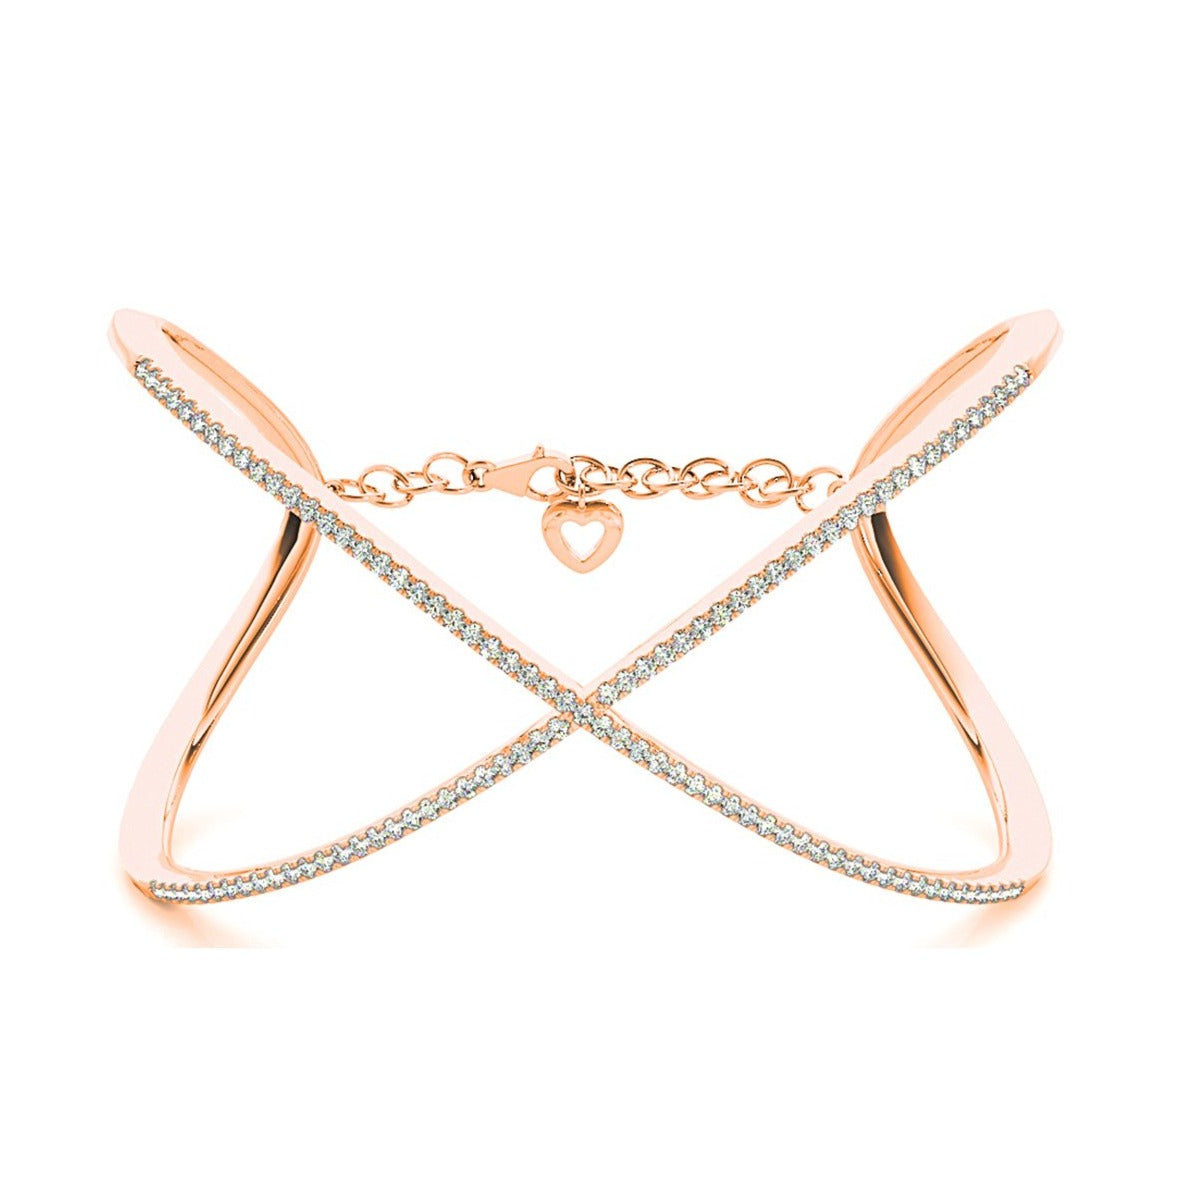 Criss Cross 1.63 ctw Round Diamond Cuff Bangle Bracelet With Security Chain-in 14K/18K White, Yellow, Rose Gold and Platinum - Christmas Jewelry Gift -VIRABYANI